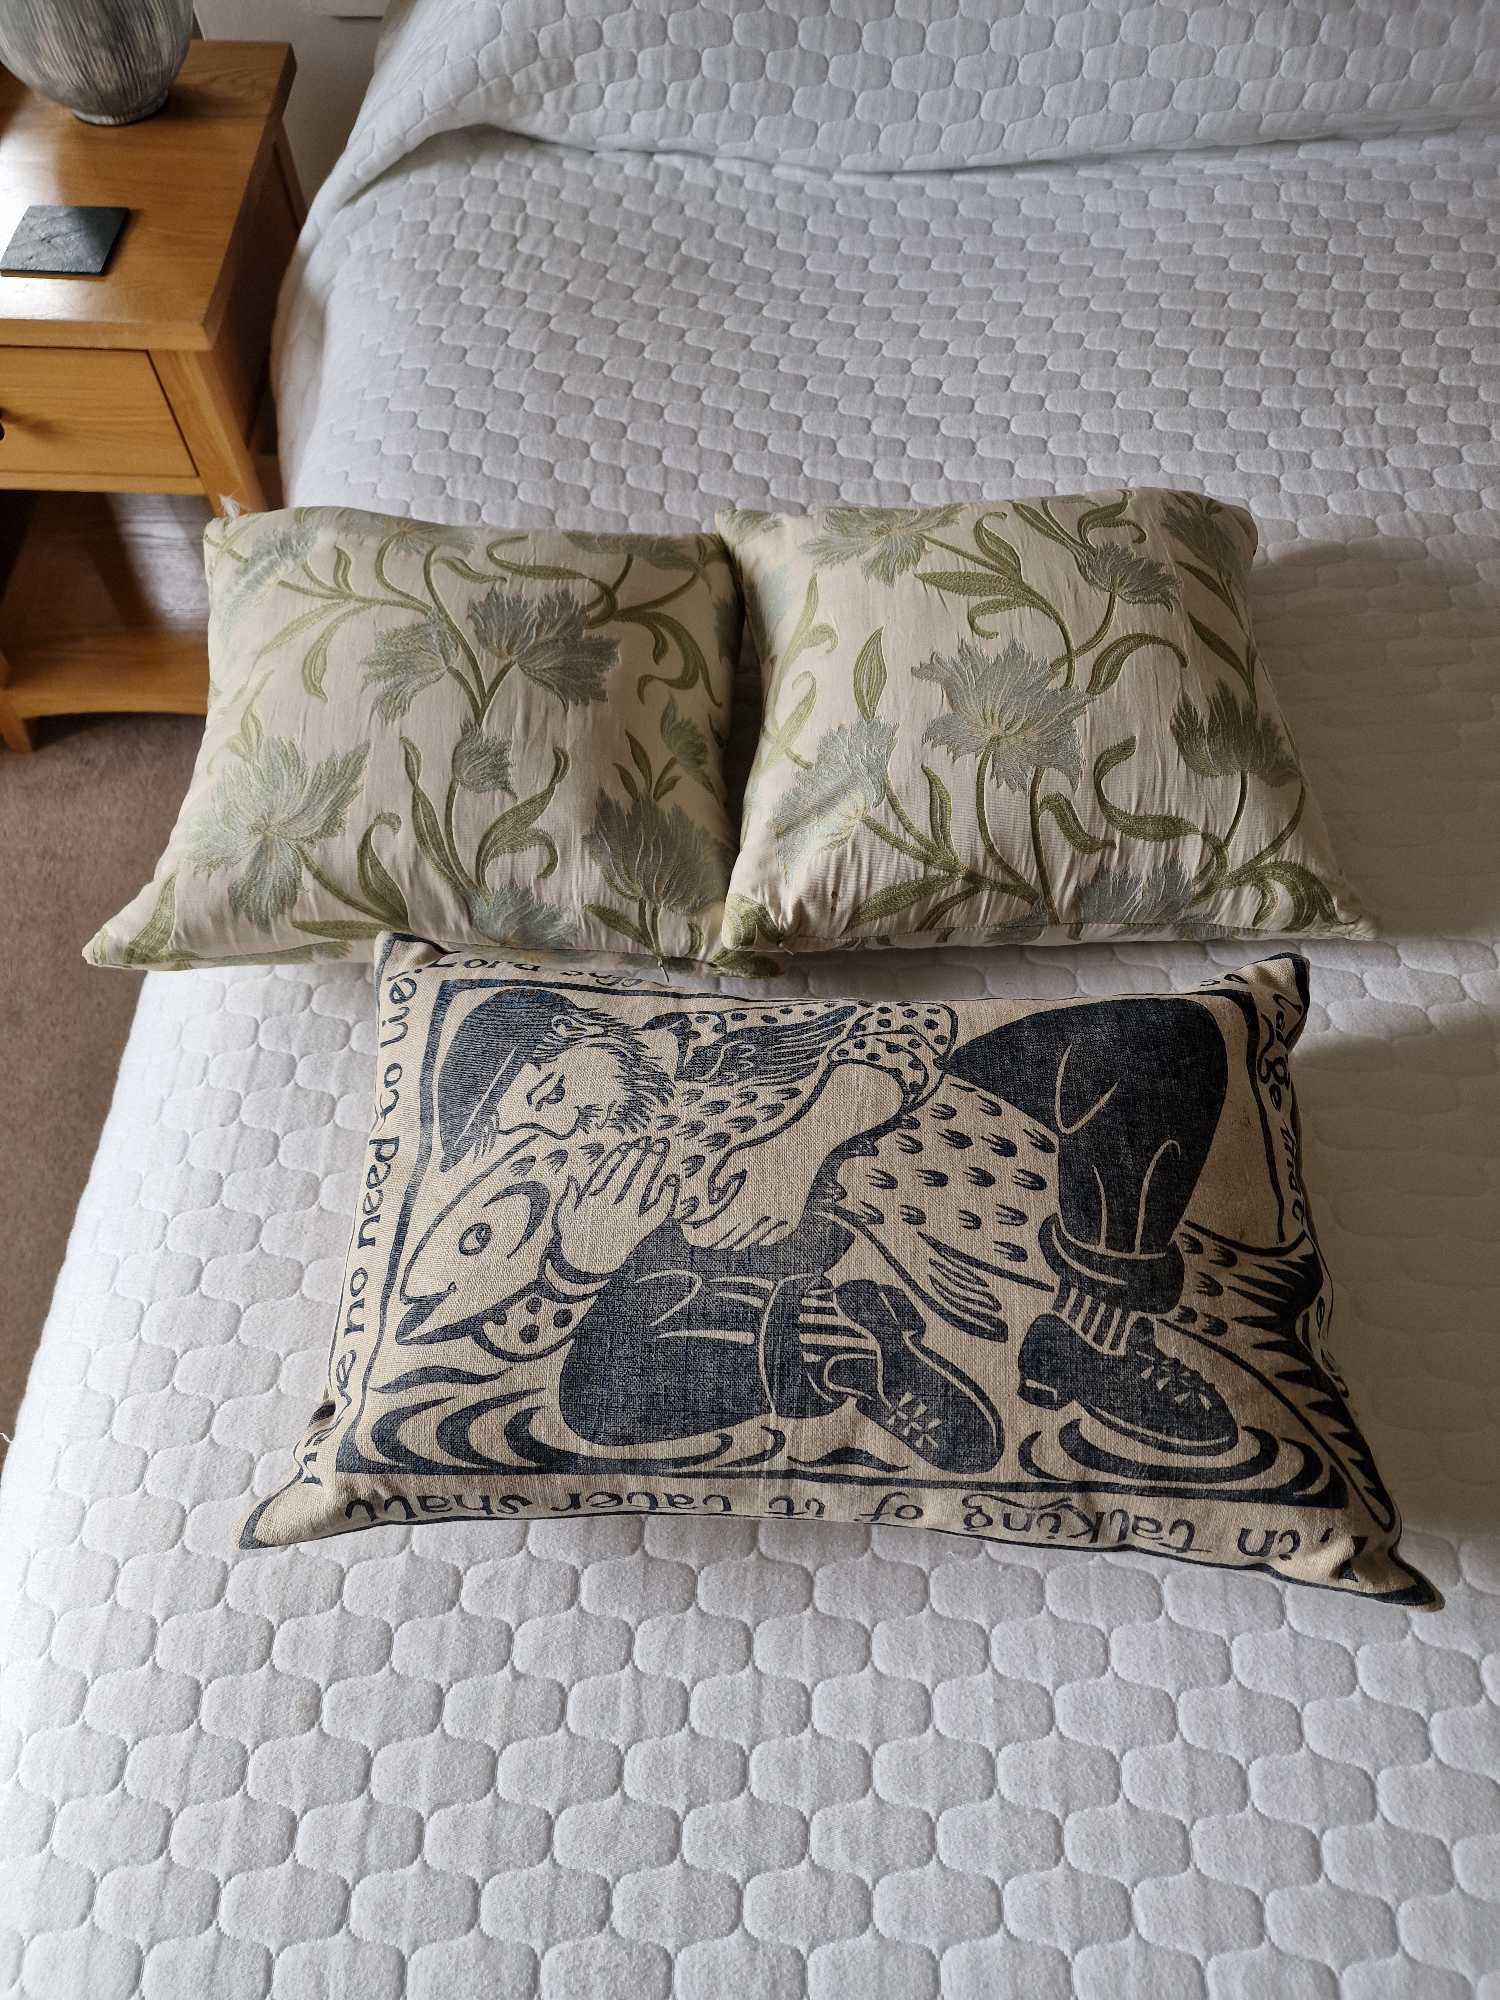 A Set Of 3 x Scatter Cushions 2 x 30 x 30cm John Lewis Floral Pattern And 1 x 50 x 26cm Fisherman